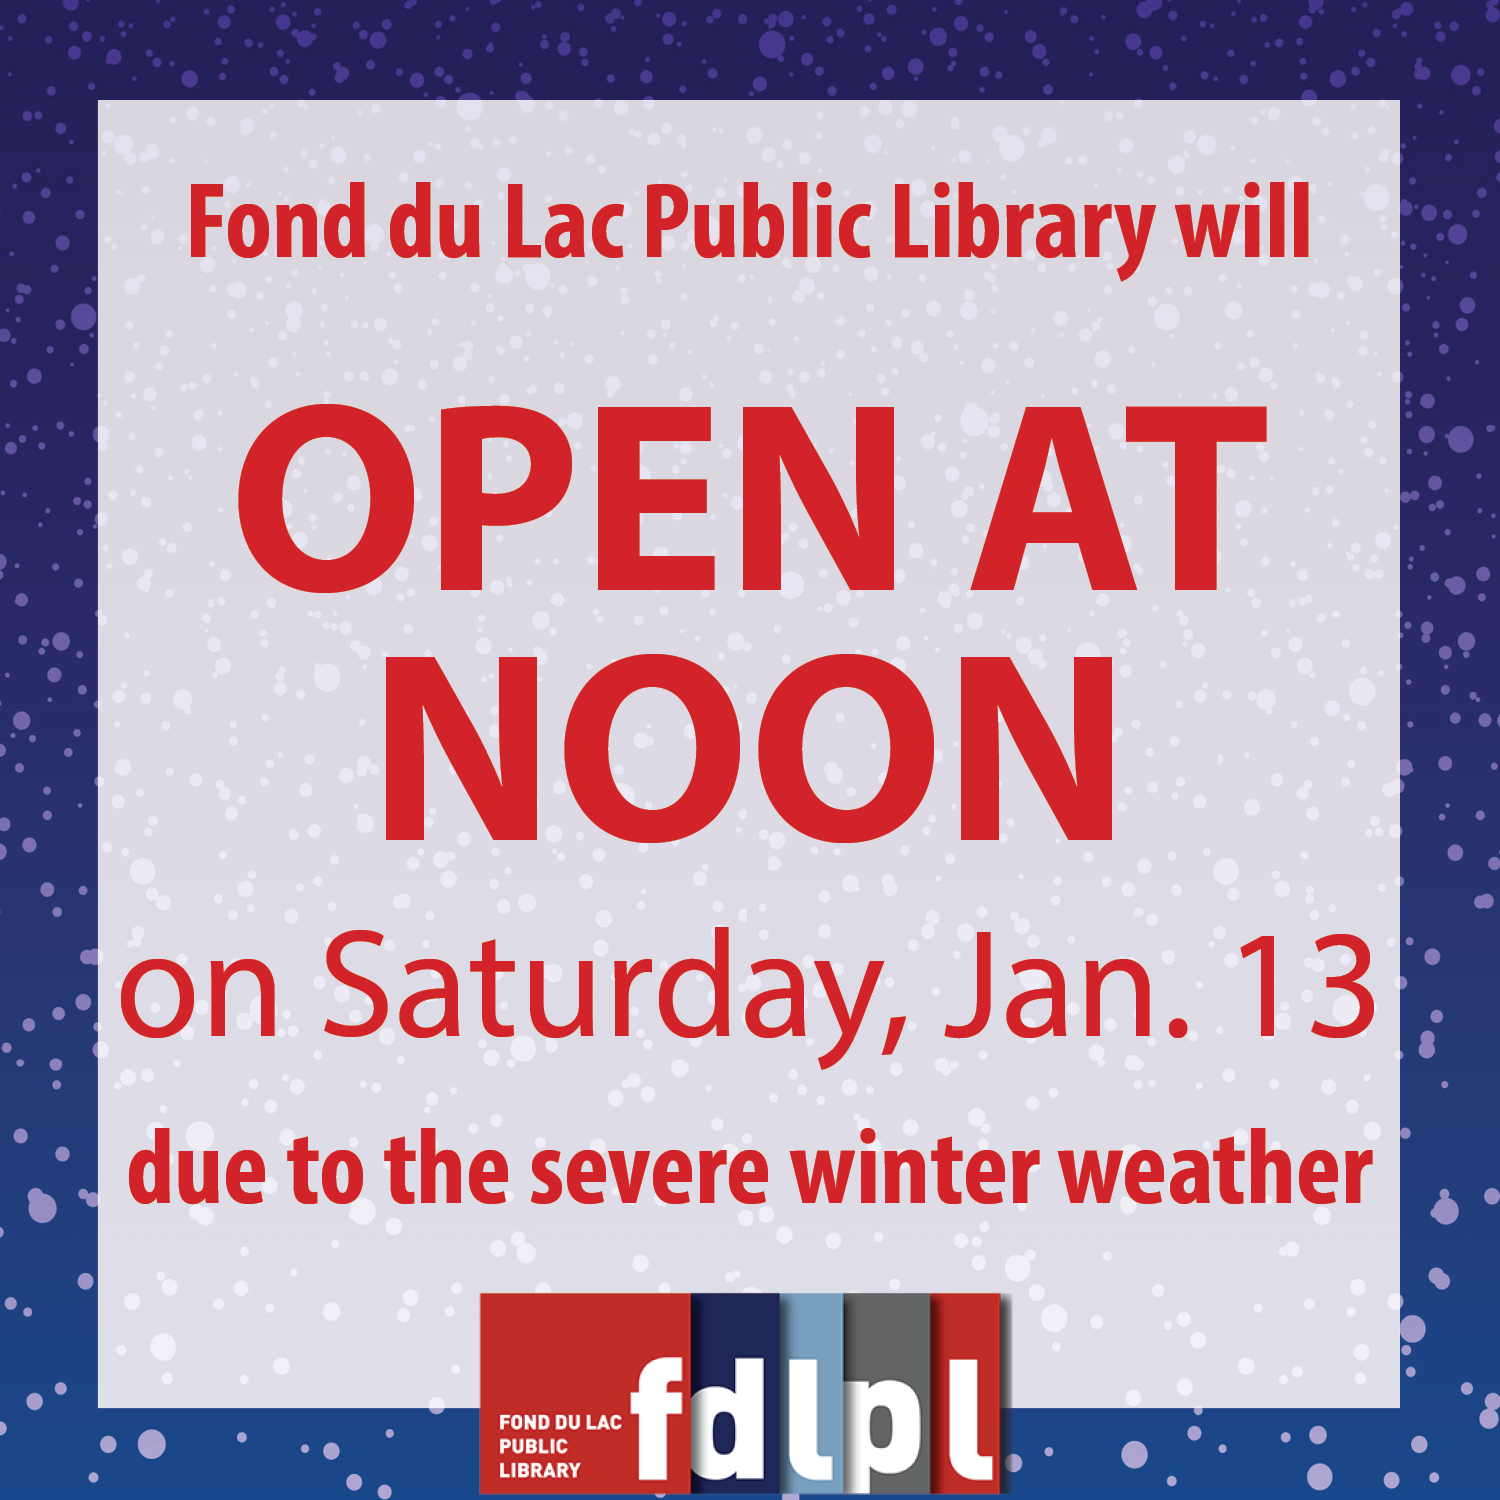 The library will open late - at noon - on Saturday, Jan. 13